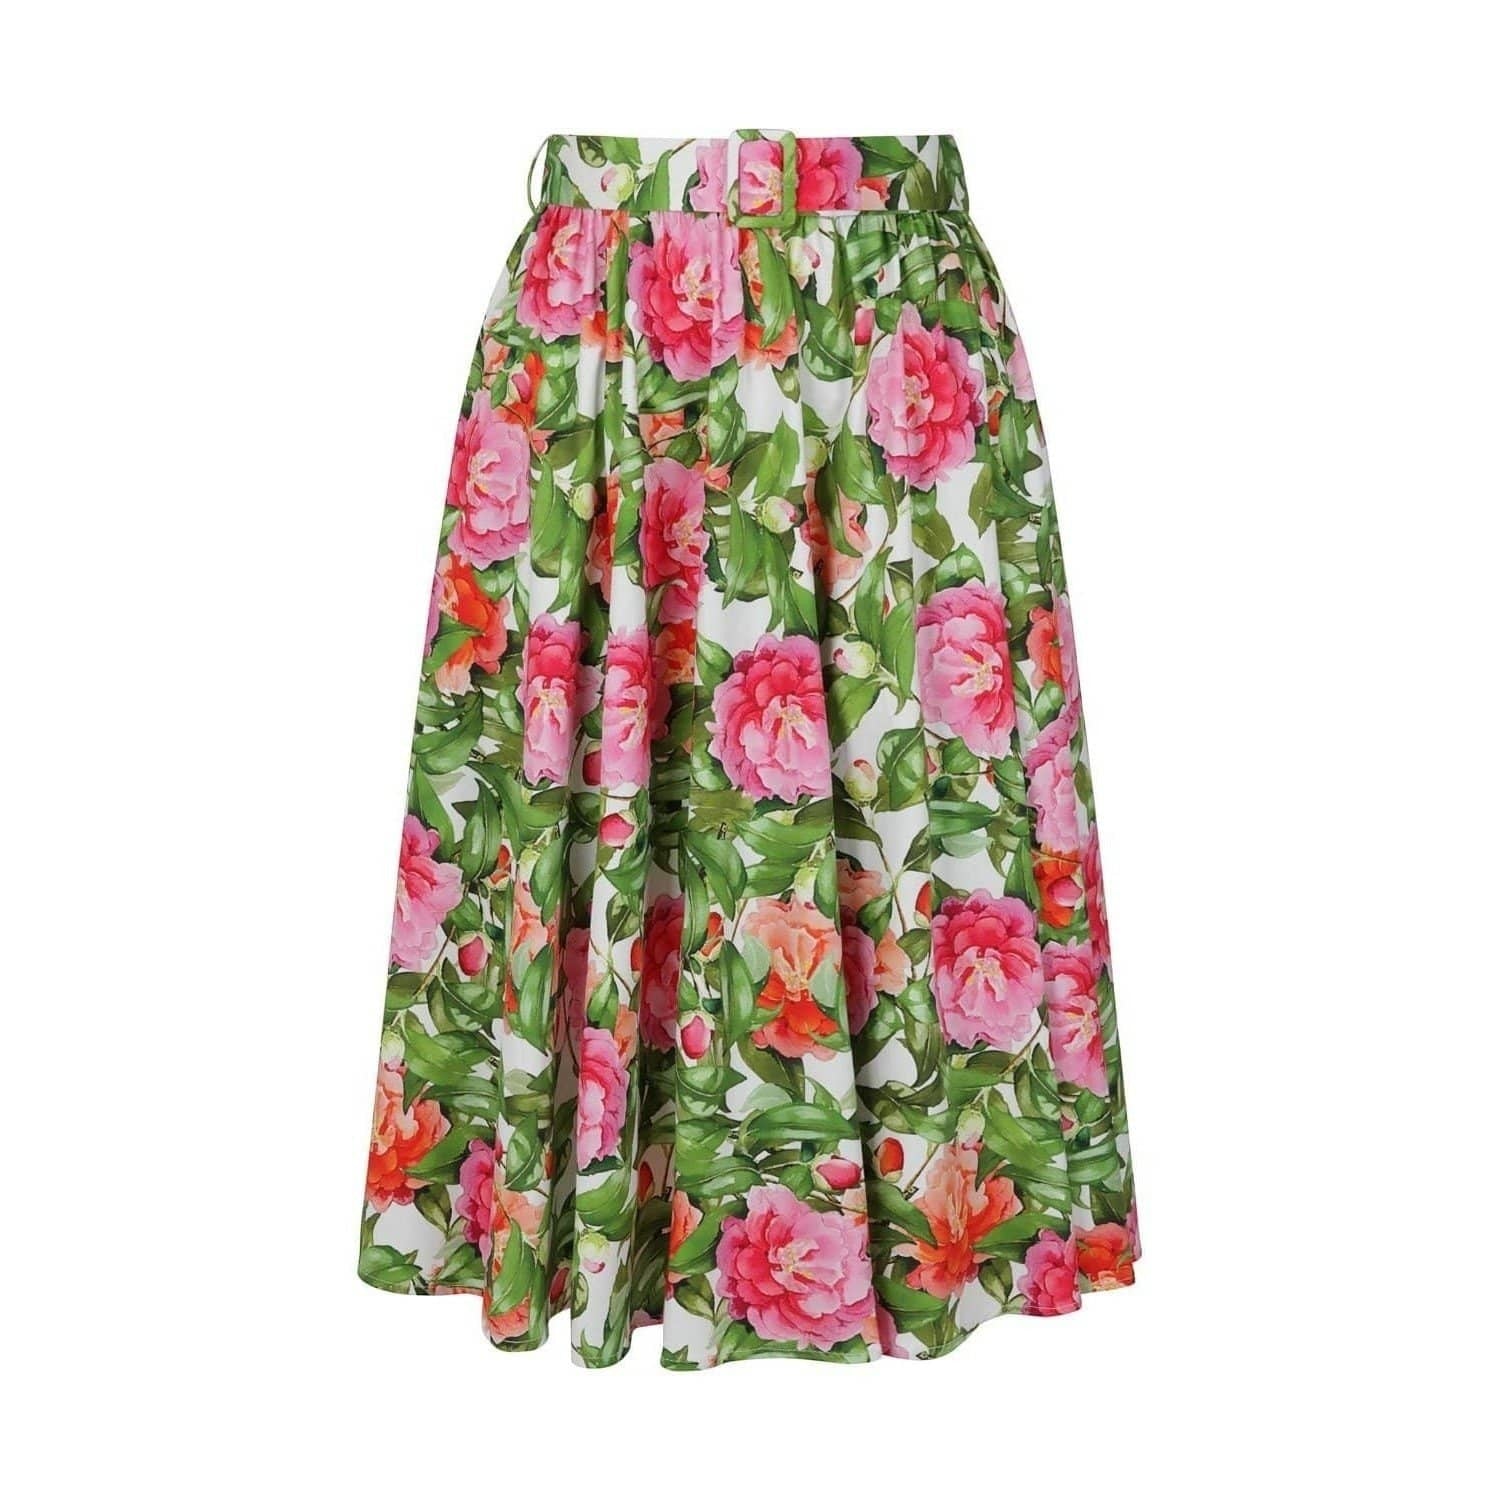 Pink And Green Floral Swing 1950s Rockabilly Skirt - Pretty Kitty Fashion